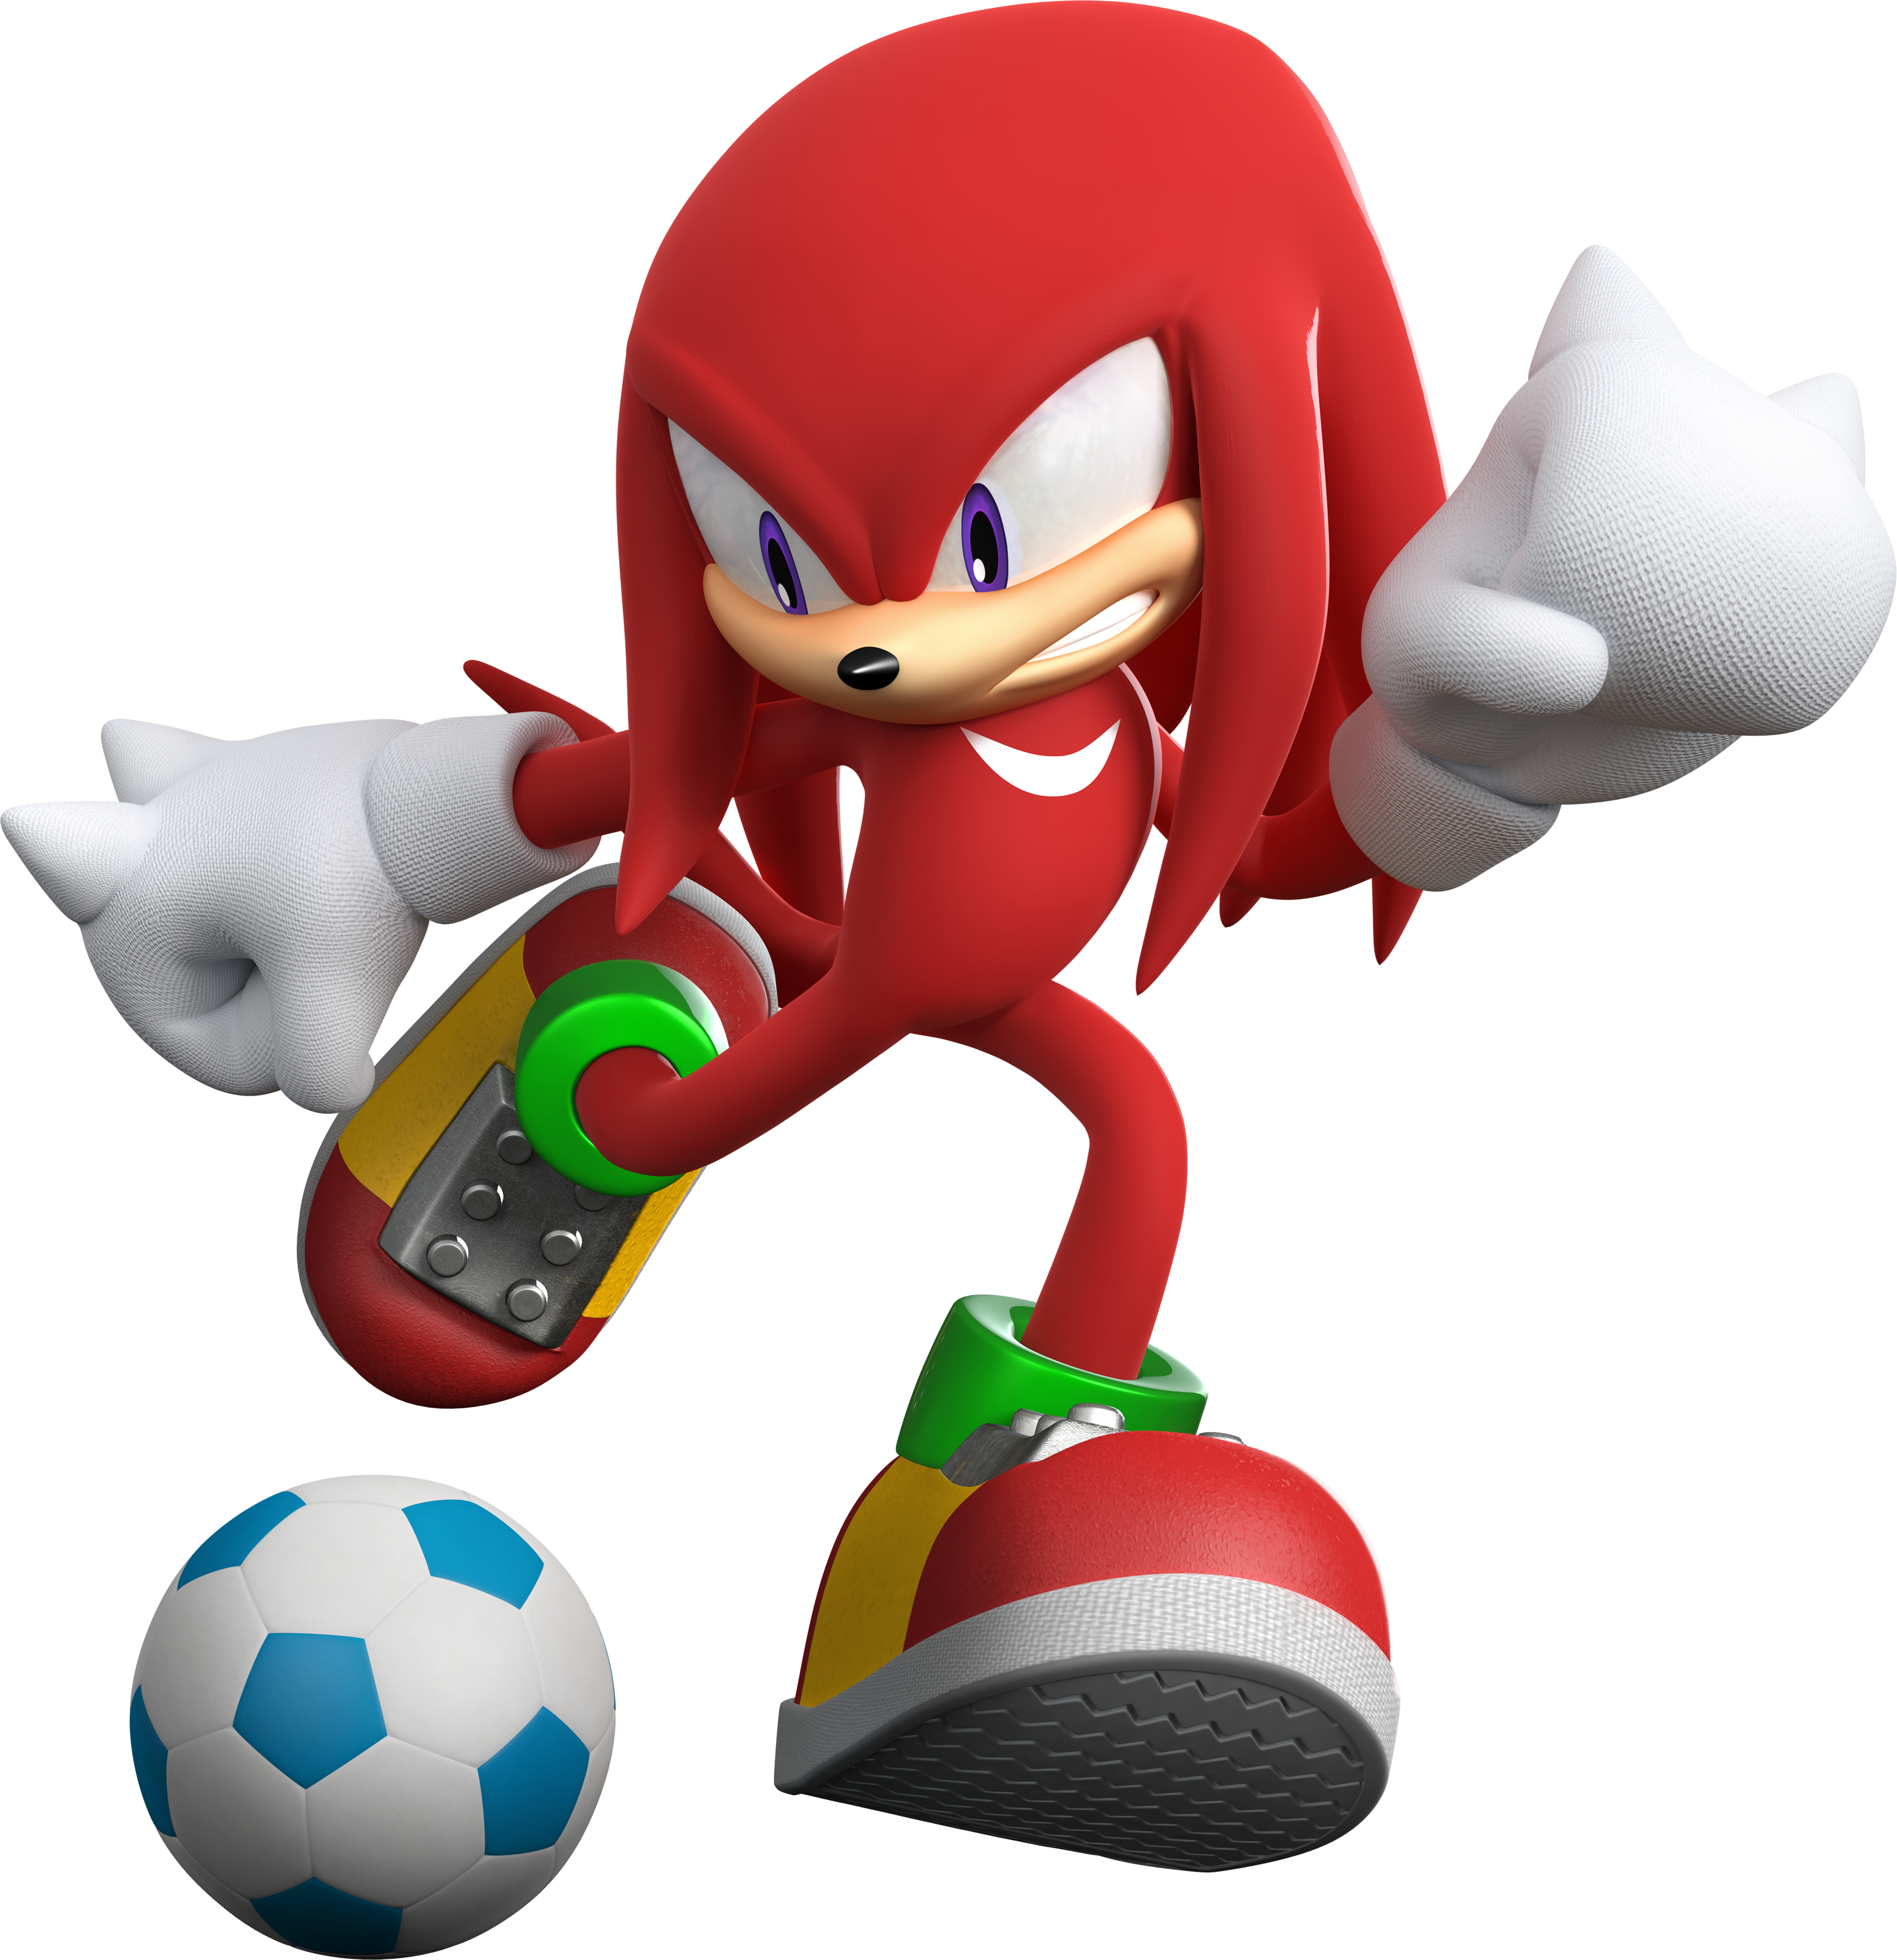 London Knuckles Image - Mario And Sonic At The London 2012 Olympic Games Knuckles (3119x3222)